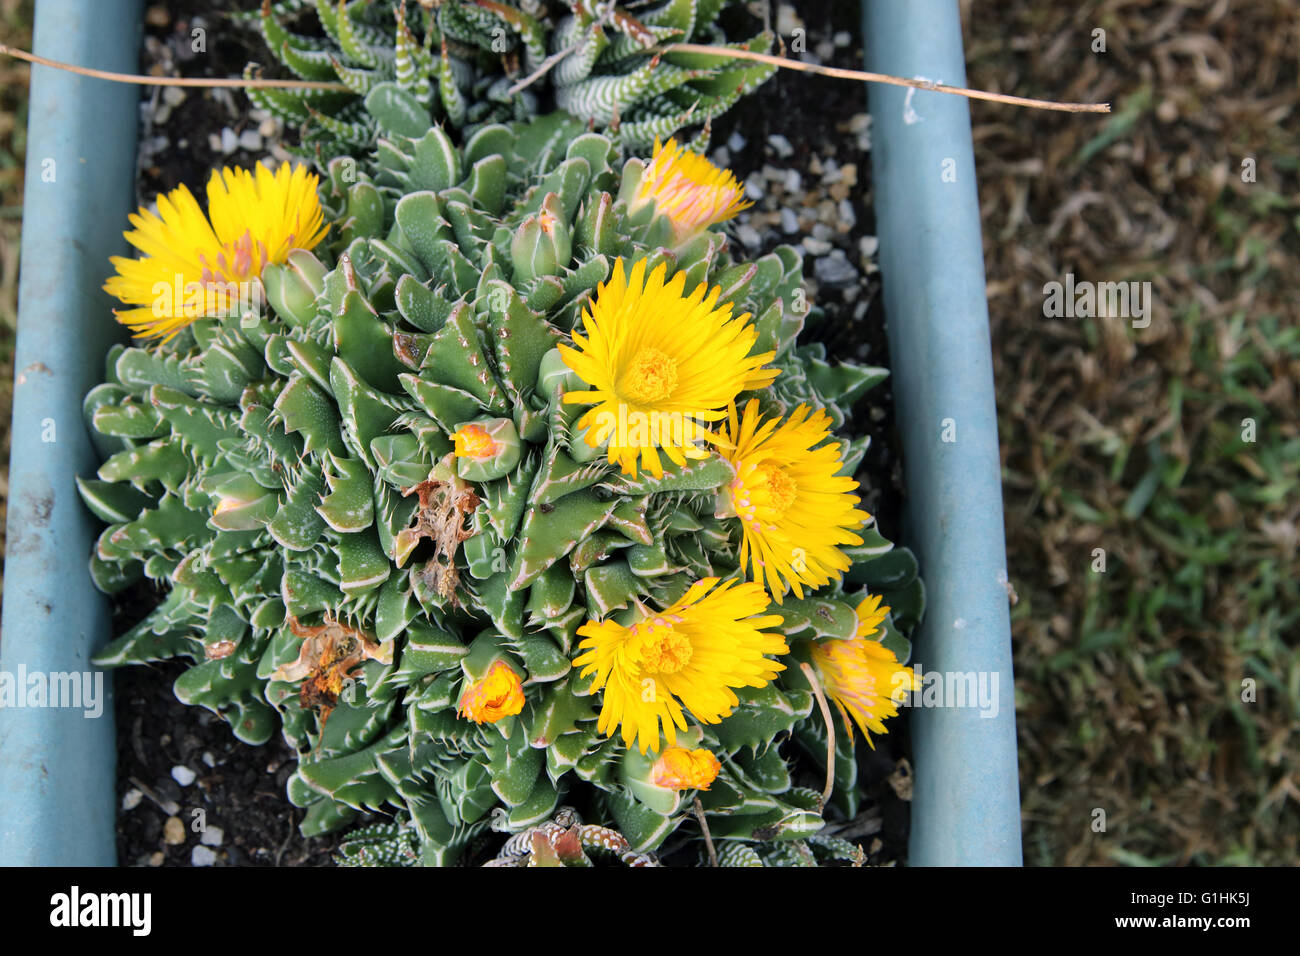 Close up of Tiger jaws succulent plant or known as Faucaria tigrina with yellow flowers Stock Photo